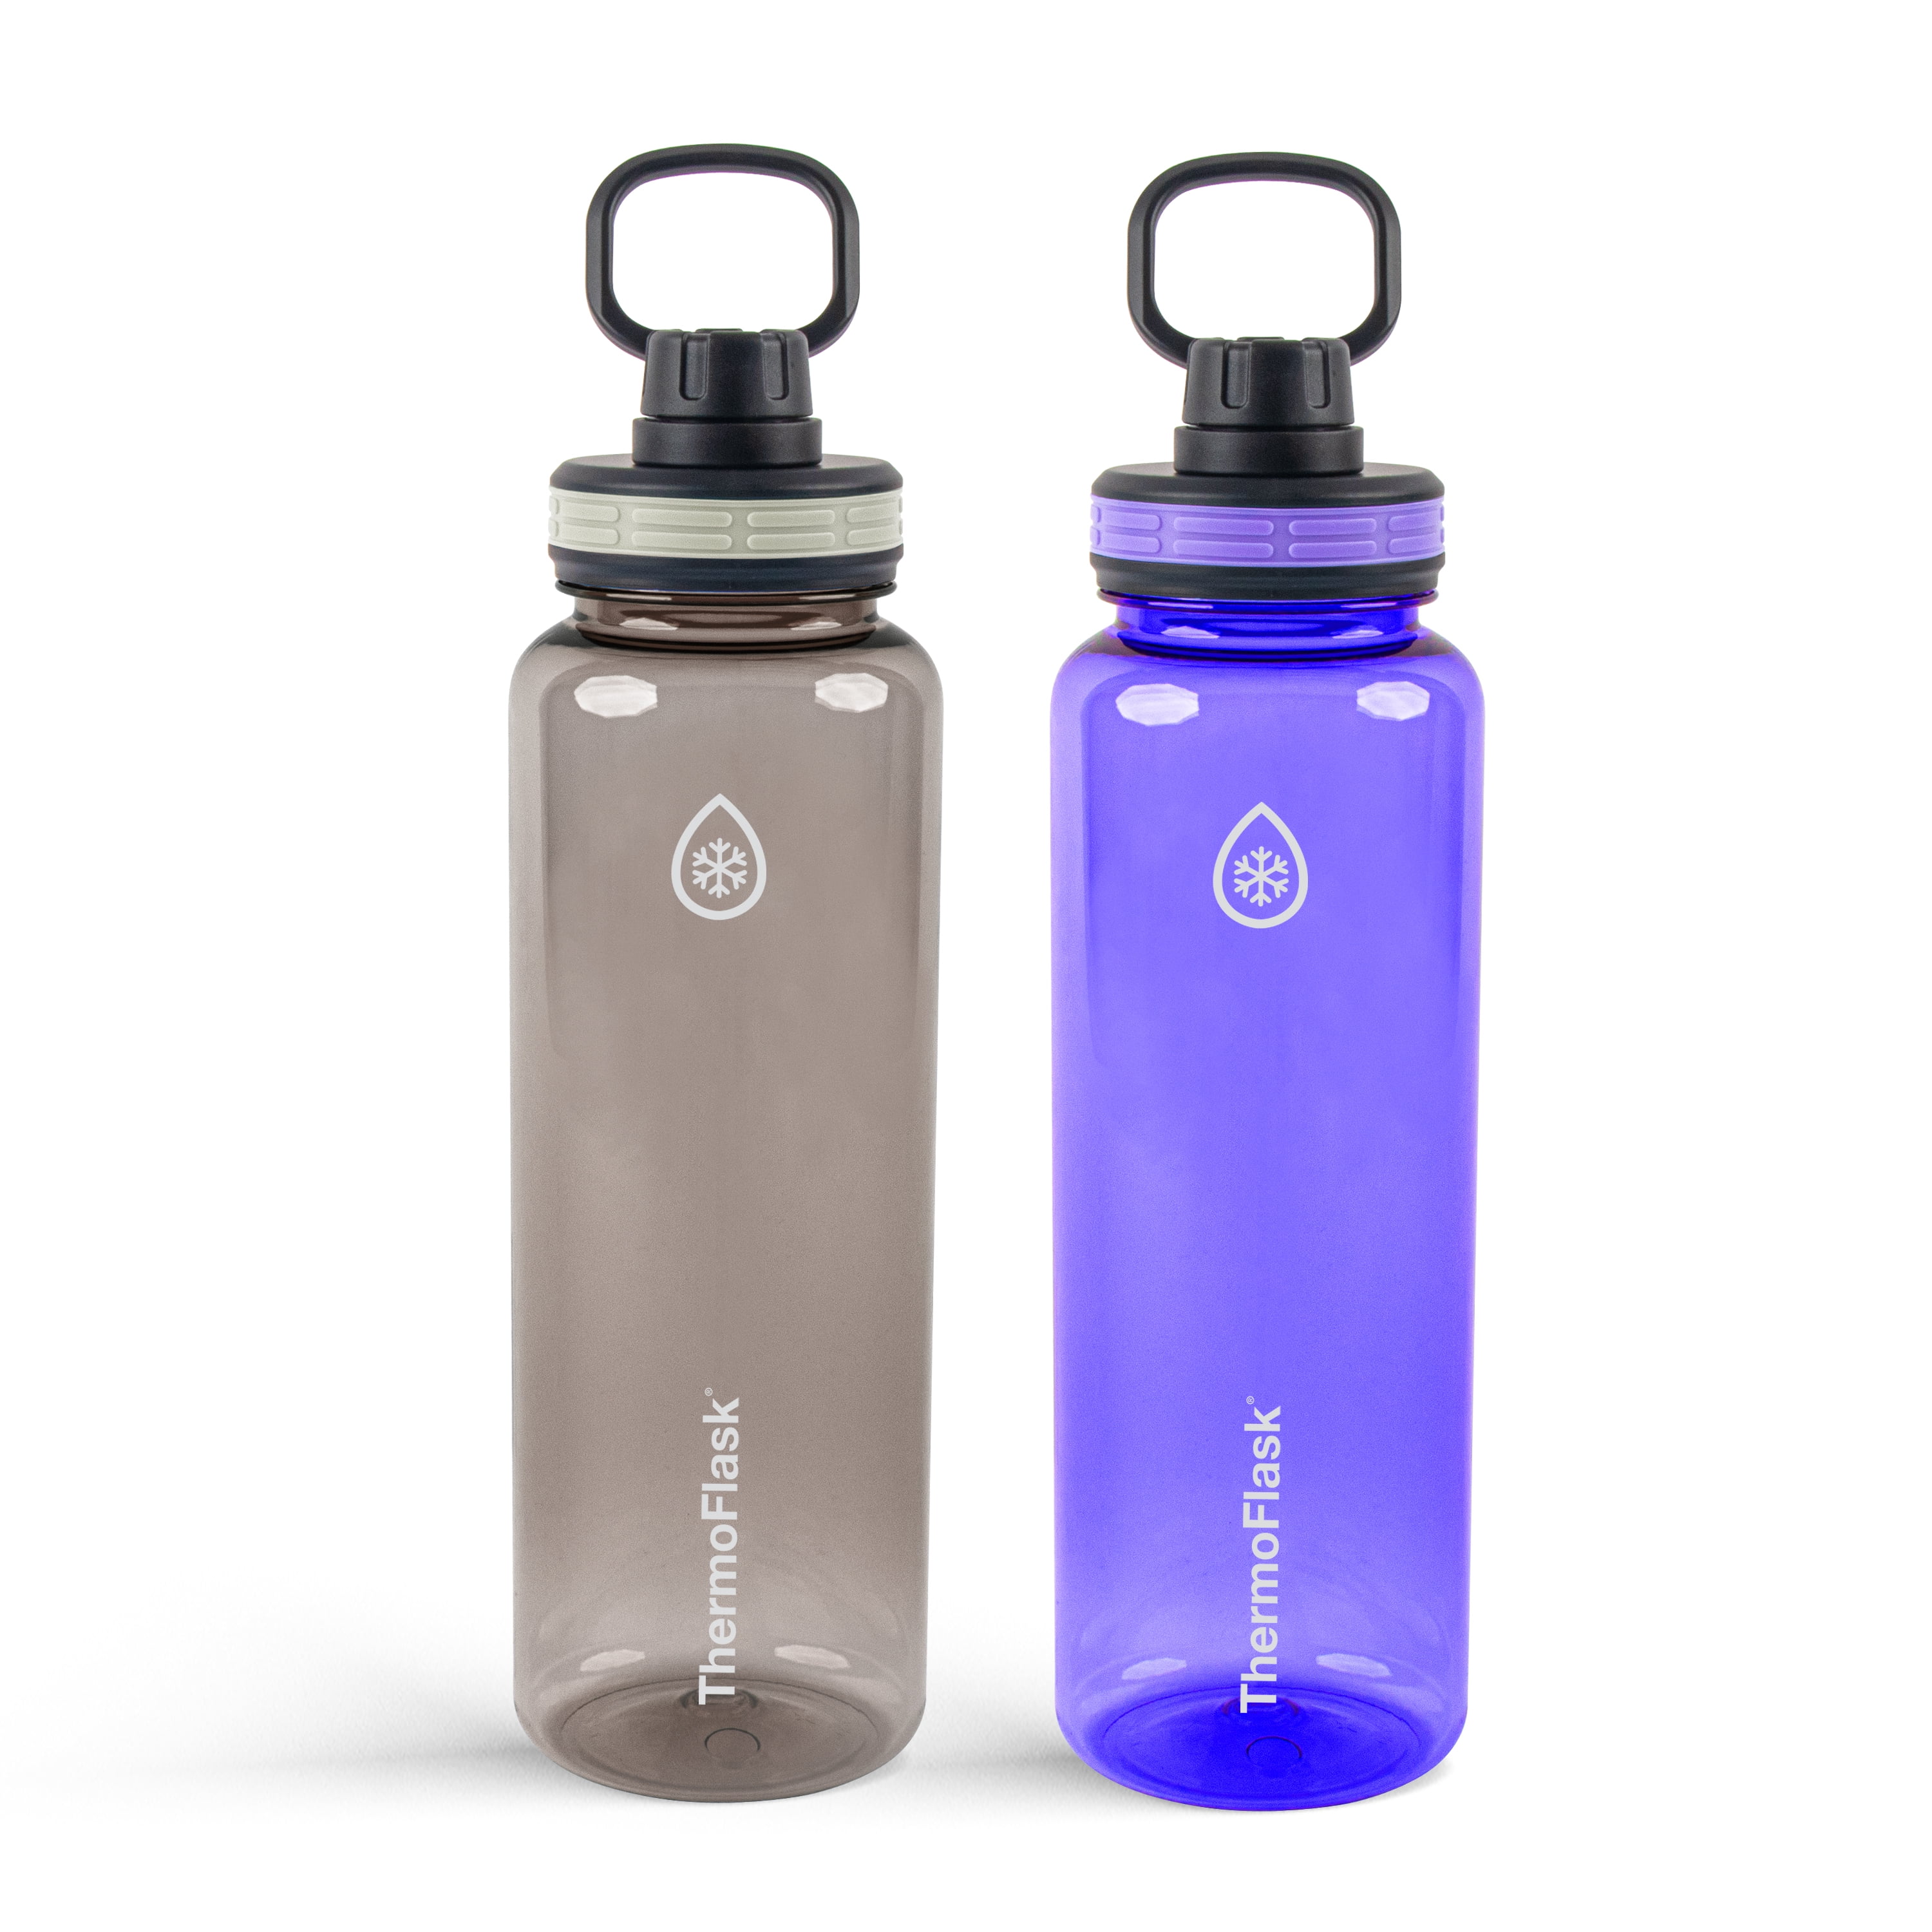 Thermoflask Double Wall Vacuum Insulated Stainless Steel 2-Pack of Water  Bottles, 40 oz, Gray/Pine